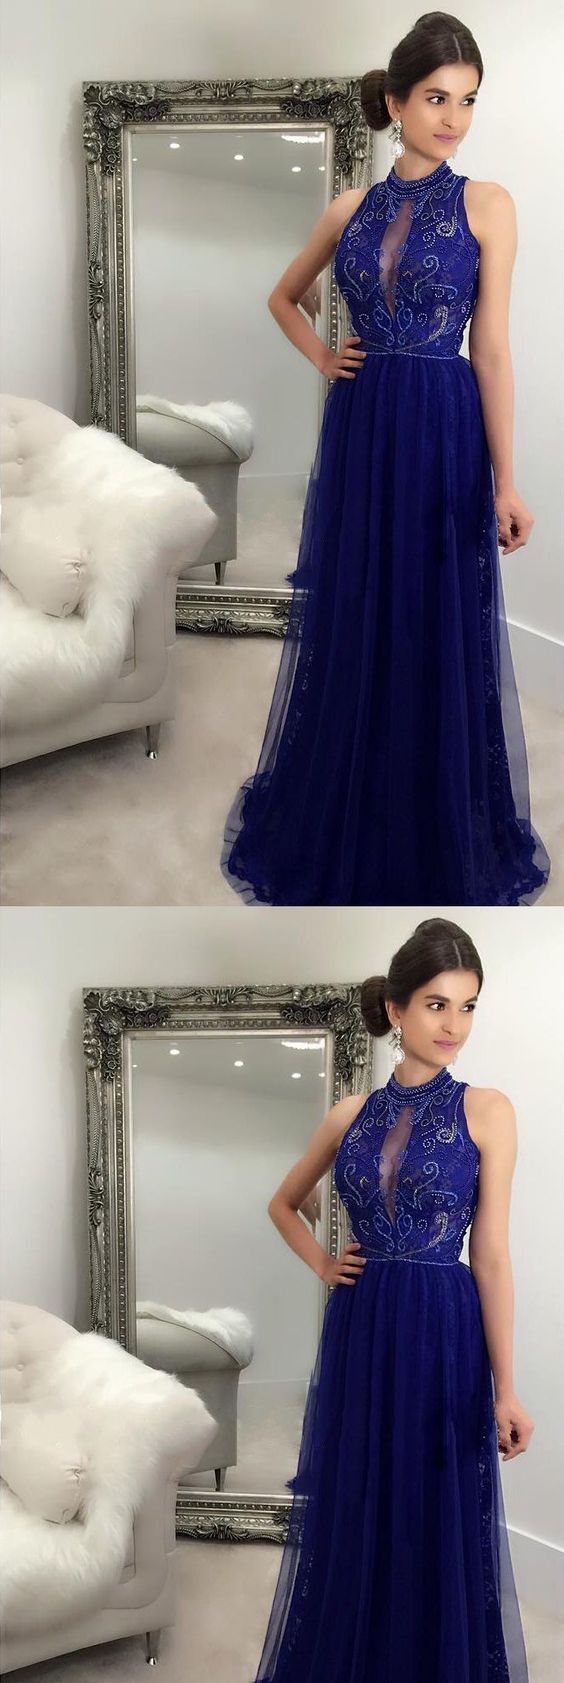 Charming Lace Long Prom Dress High Neck A-line Formal Evening Dress With Beading M6292